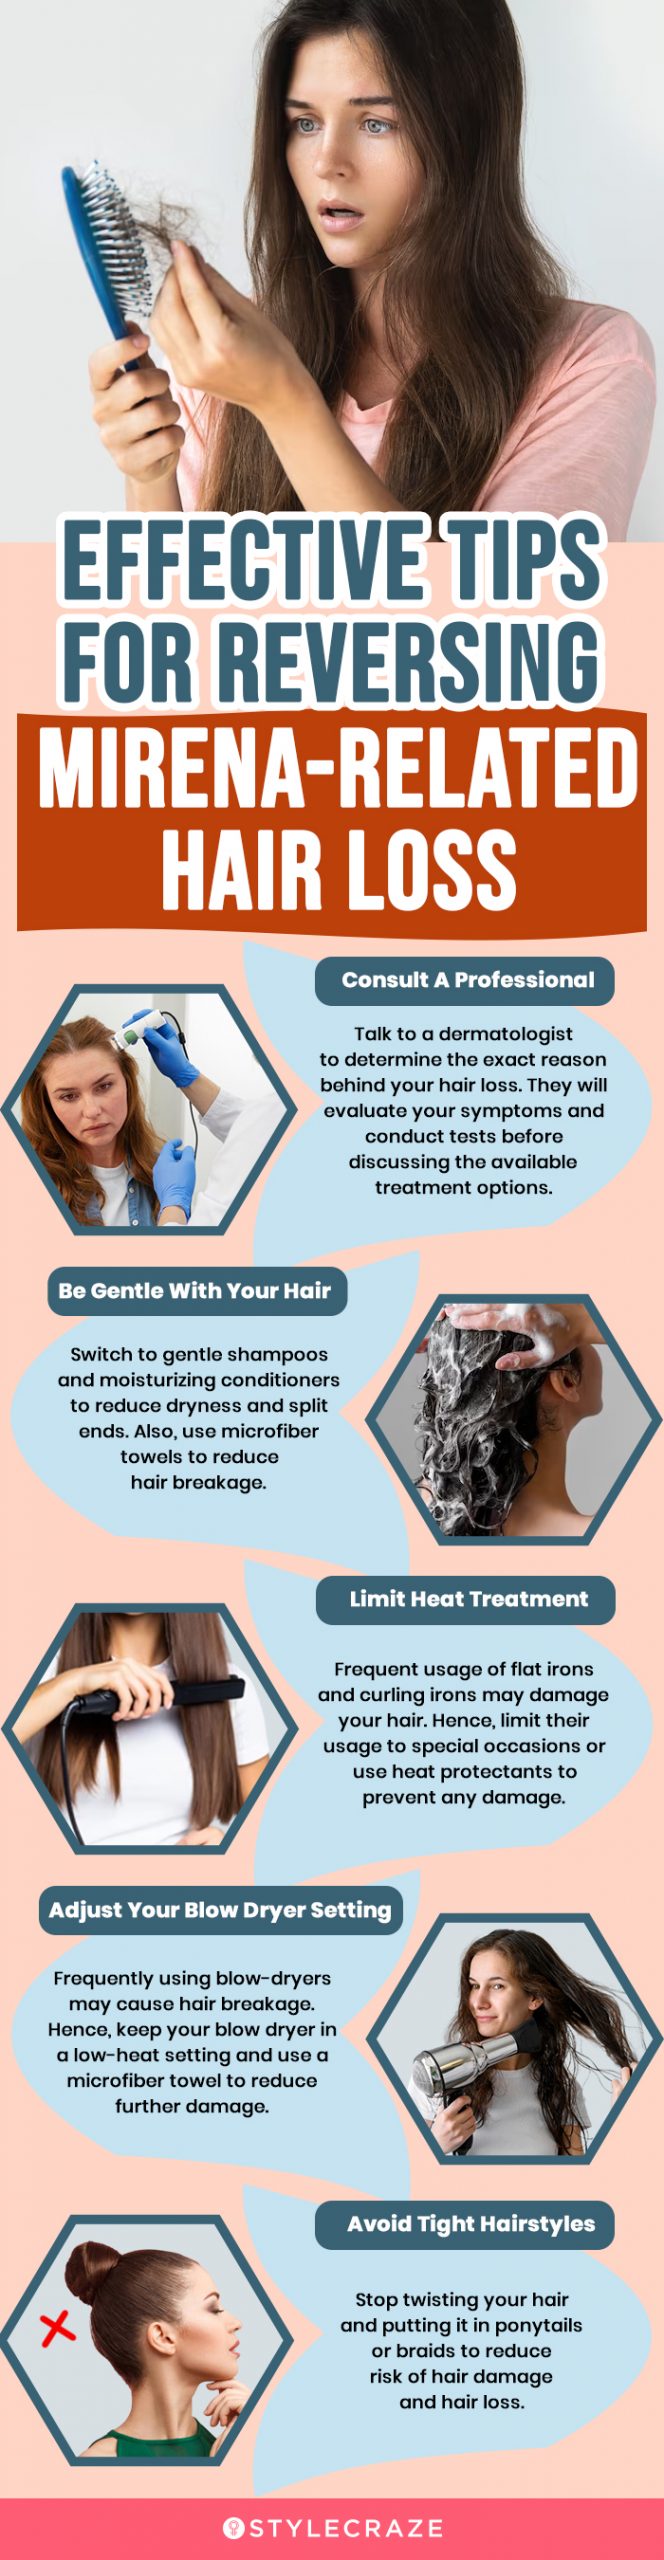 effective tips for reversing mirena related hair loss (infographic)